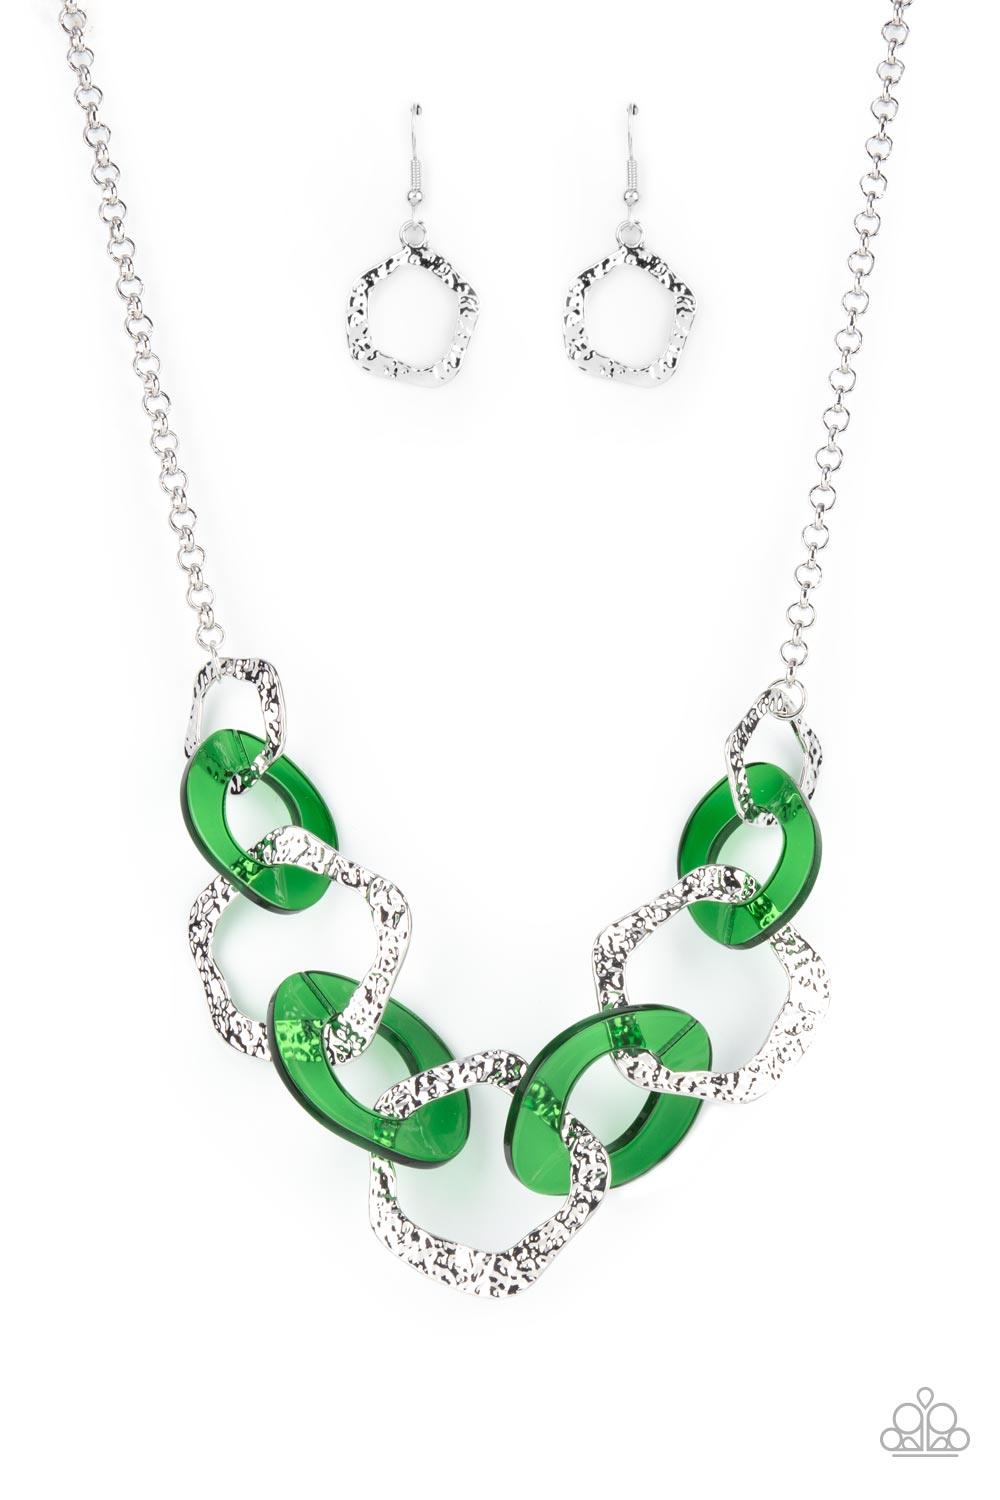 Paparazzi Accessories Urban Circus - Green An asymmetrical assortment of Leprechaun acrylic rings and hammered silver hoops boldly interlock below the collar, creating an intense pop of color. Features an adjustable clasp closure. Sold as one individual n